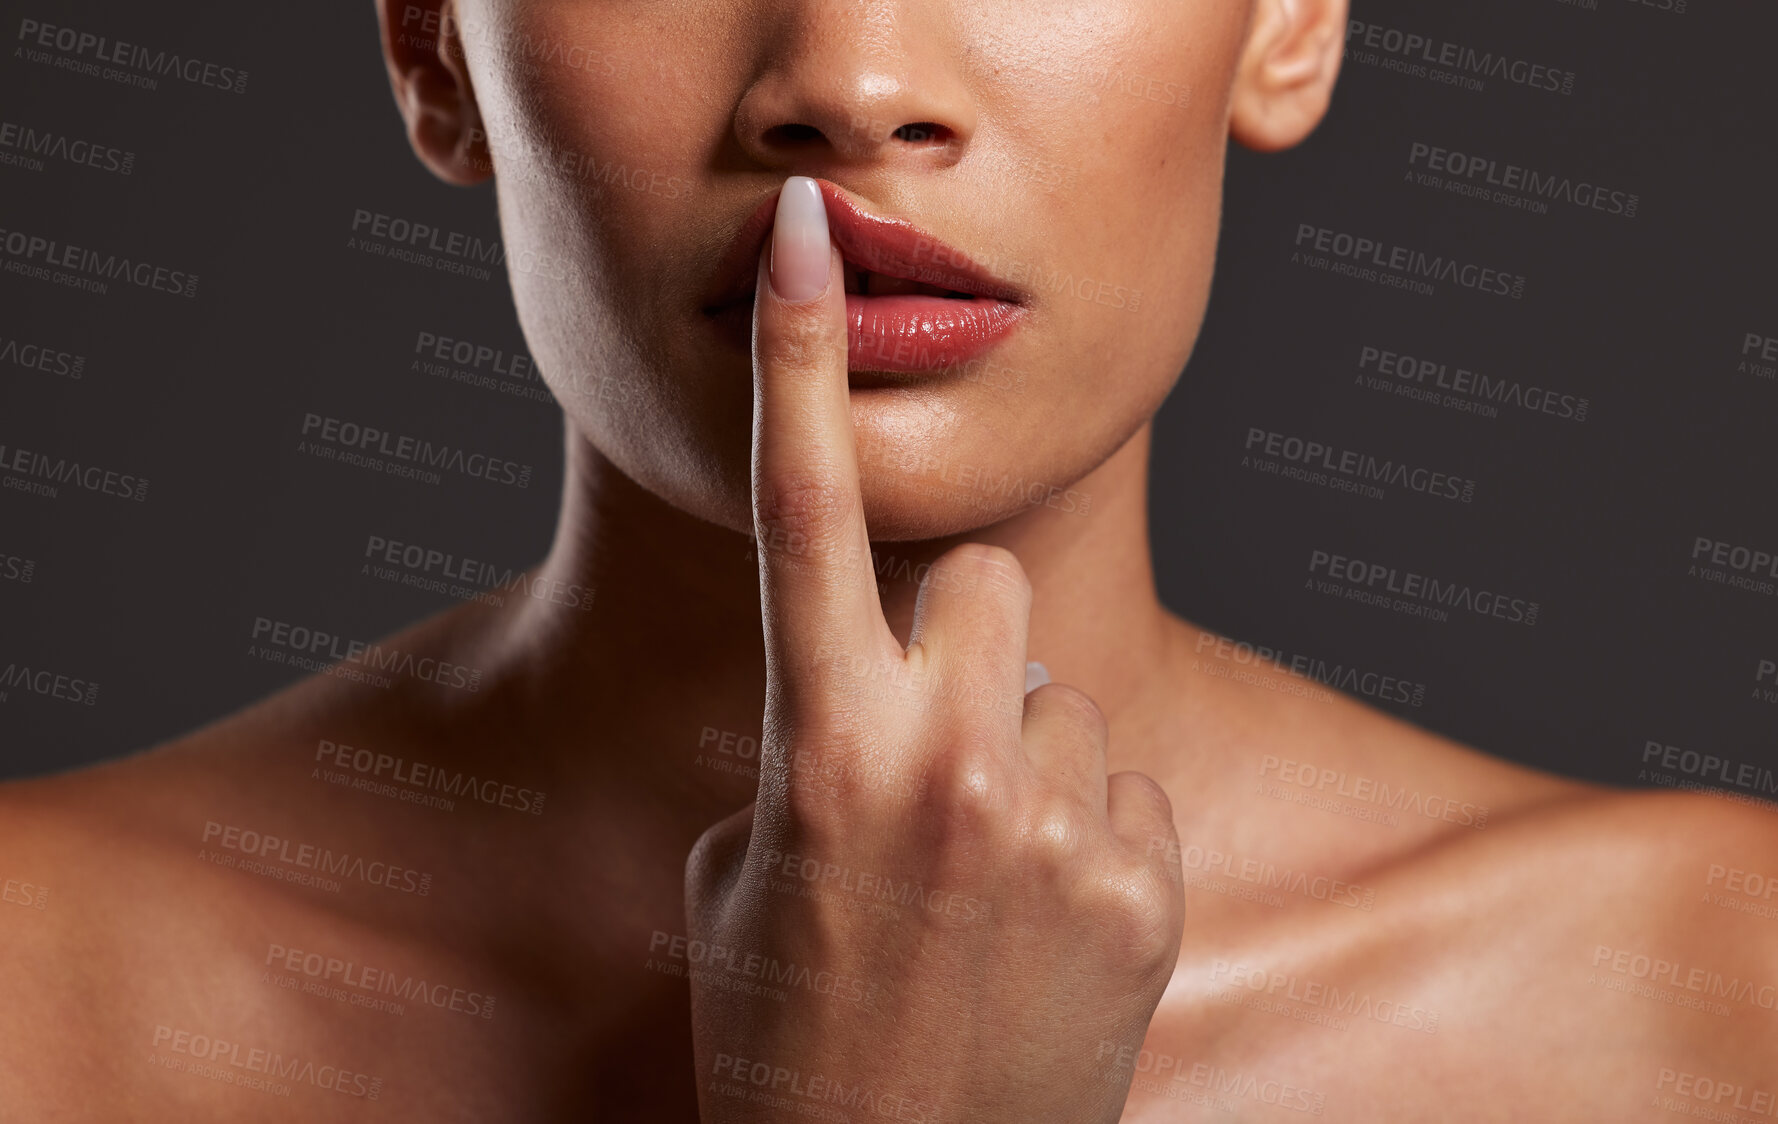 Buy stock photo Finger, lips and beauty with a model woman in studio on a gray background for skincare or cosmetics. Hand, makeup and mouth with a female touching her lip to promote a lipstick or cosmetic product